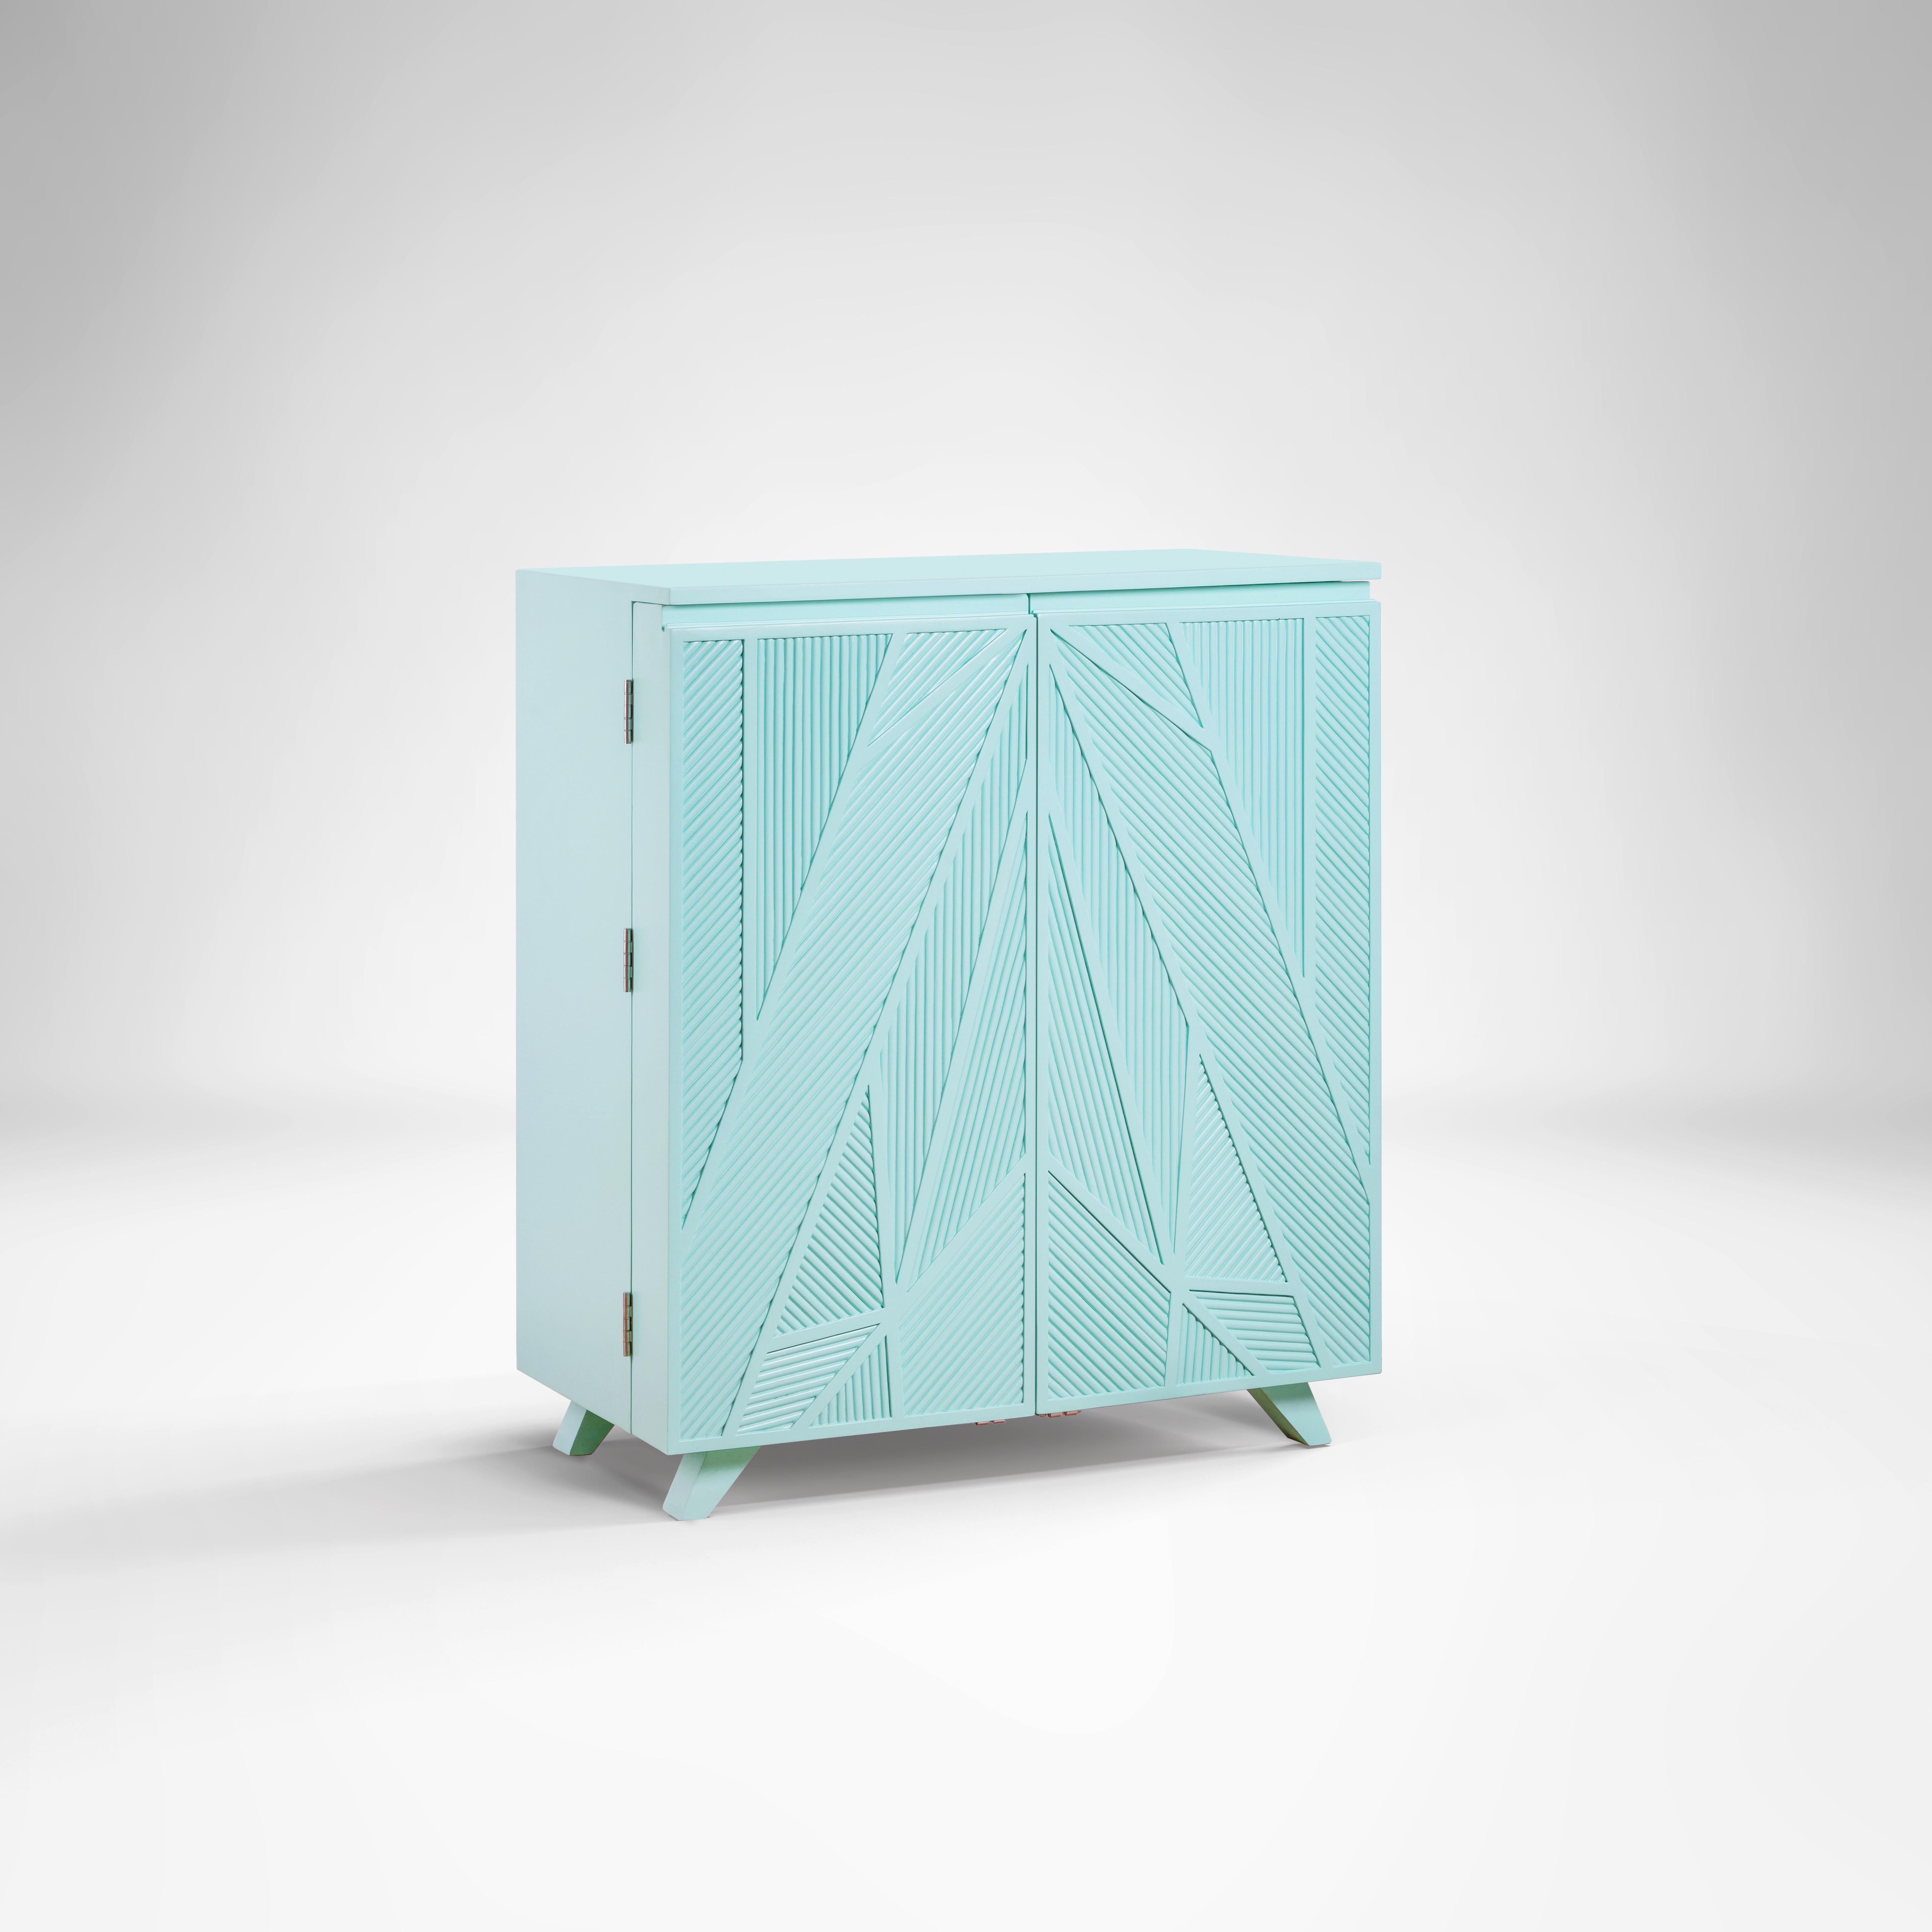 Tiffany blue geometric bar cabinet inspired by Ancient Egypt use of Palm Branch
Our unique Cool Palm bar cabinet manifests Ancient Egyptian woven palms in a vibrant Tiffany blue shade. The dynamic pattern will surely give life to your room with its